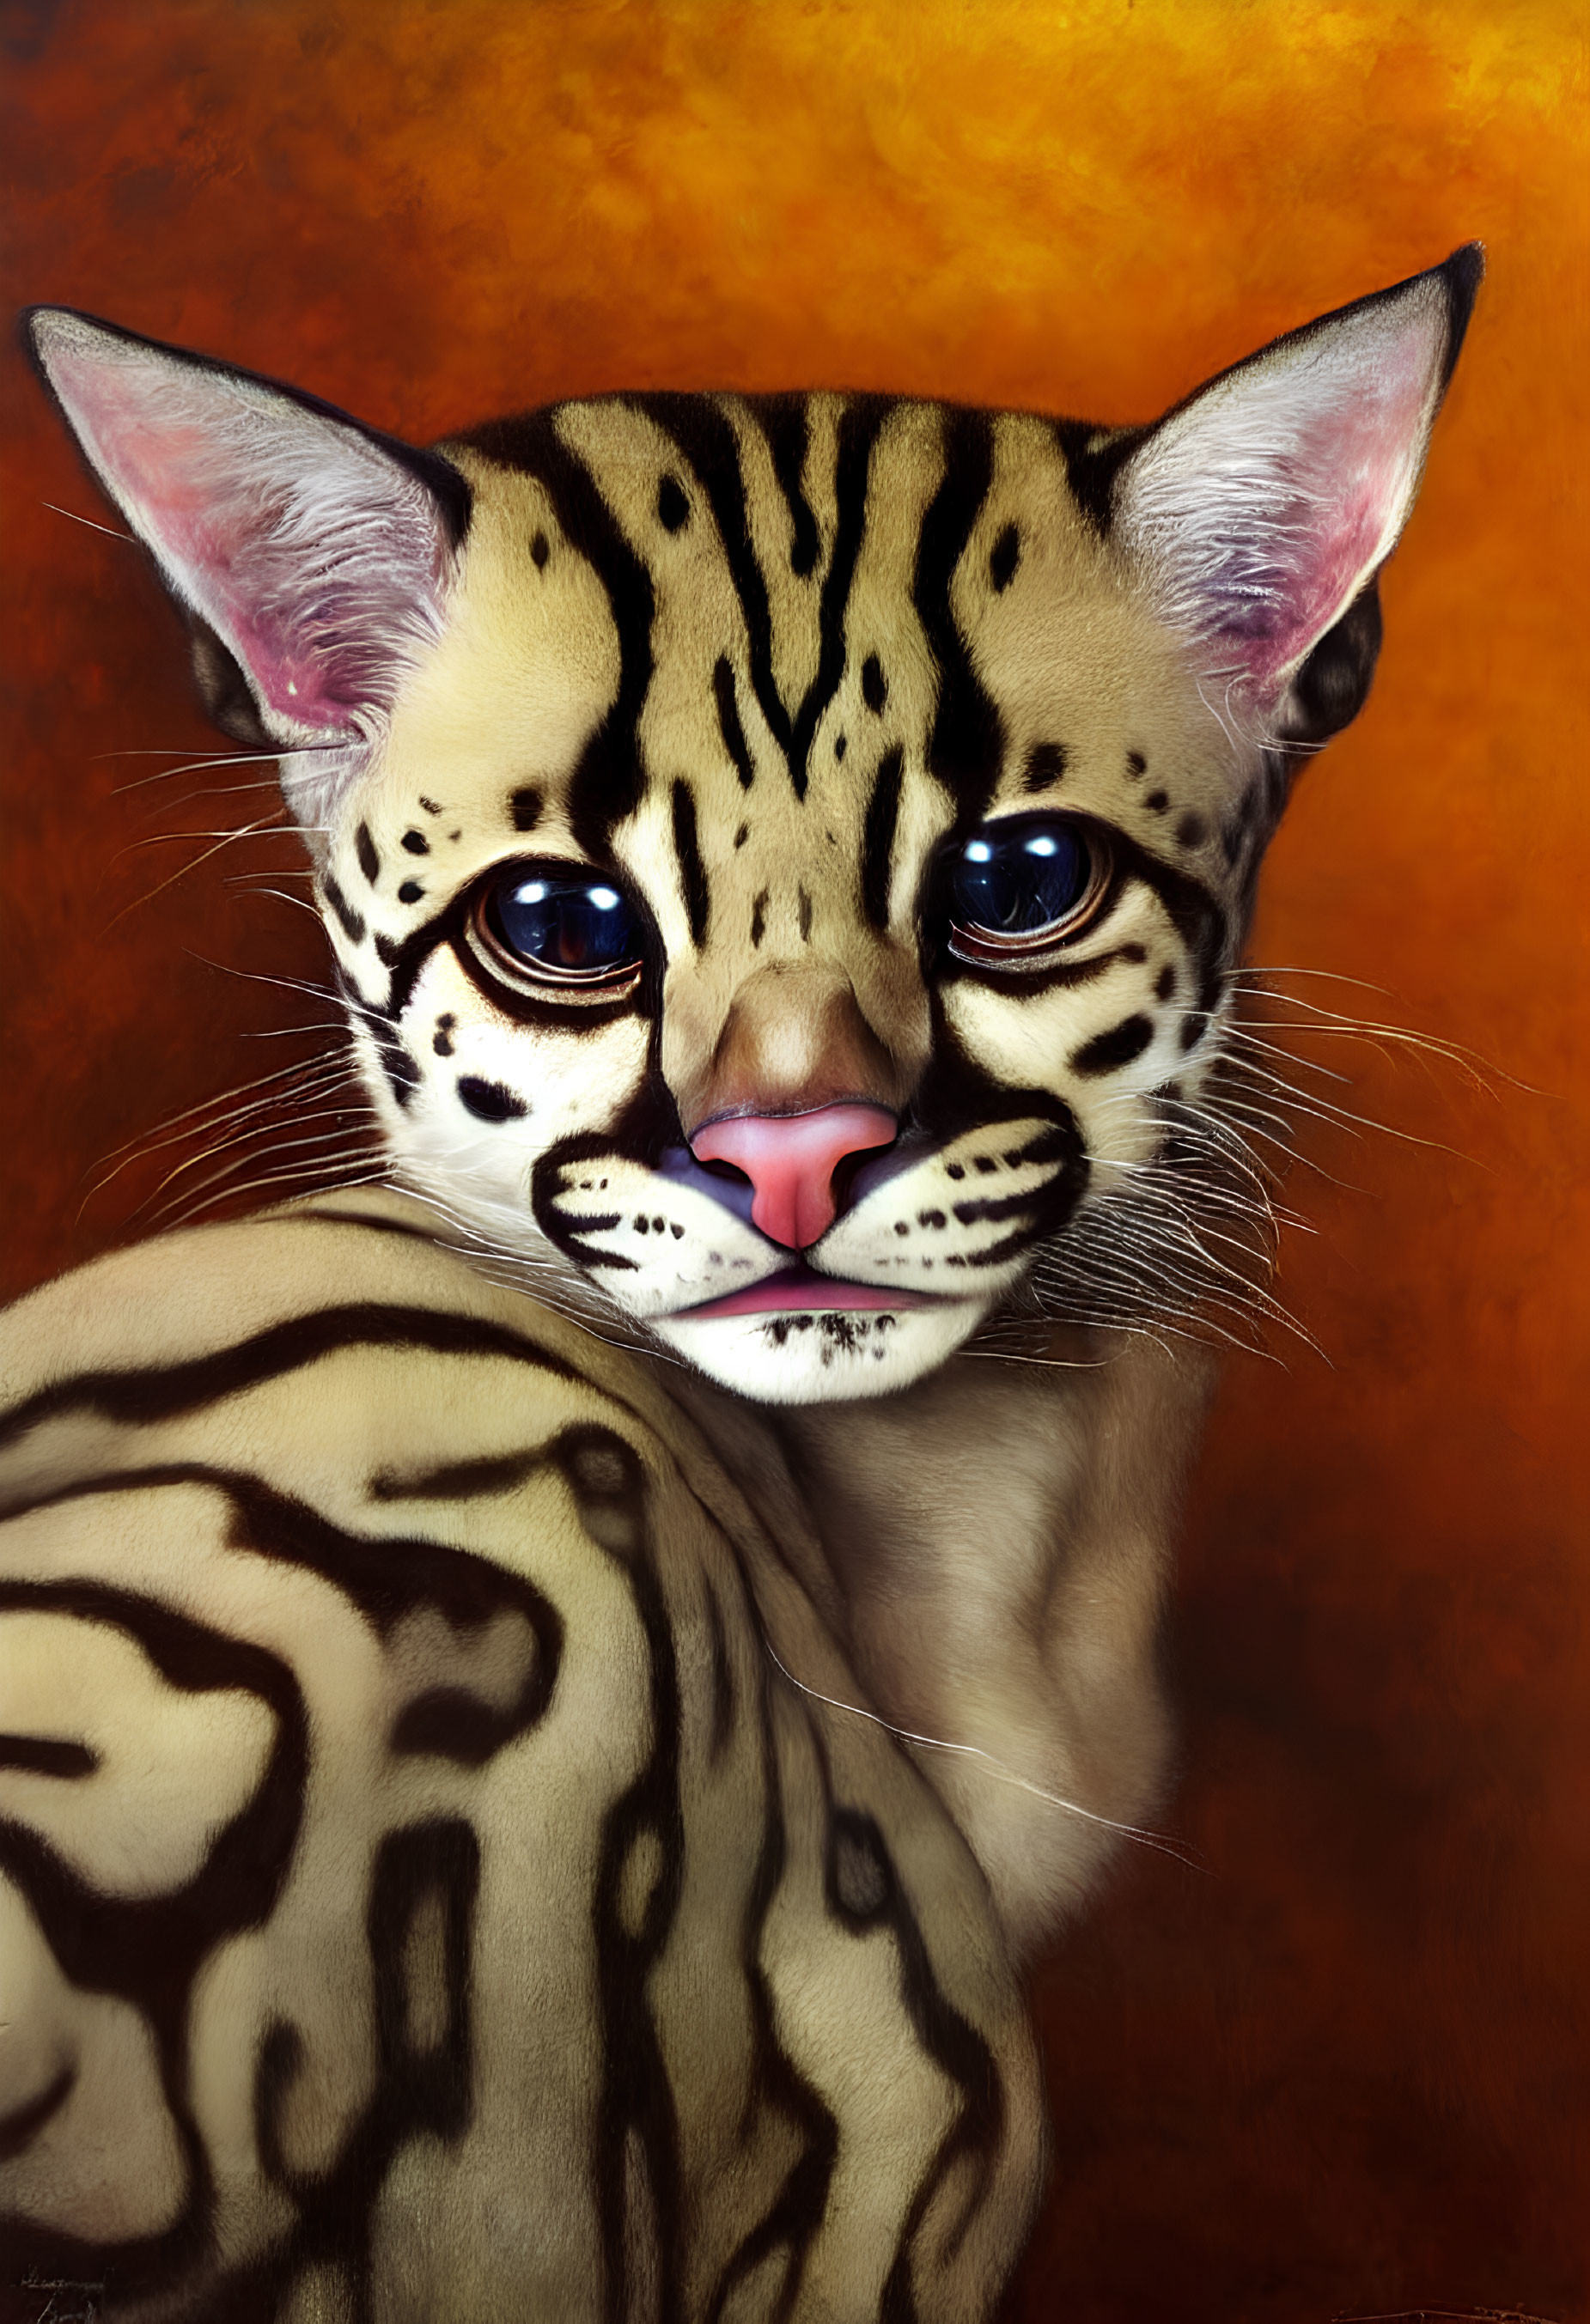 Realistic Digital Painting of Ocelot with Detailed Fur Patterns